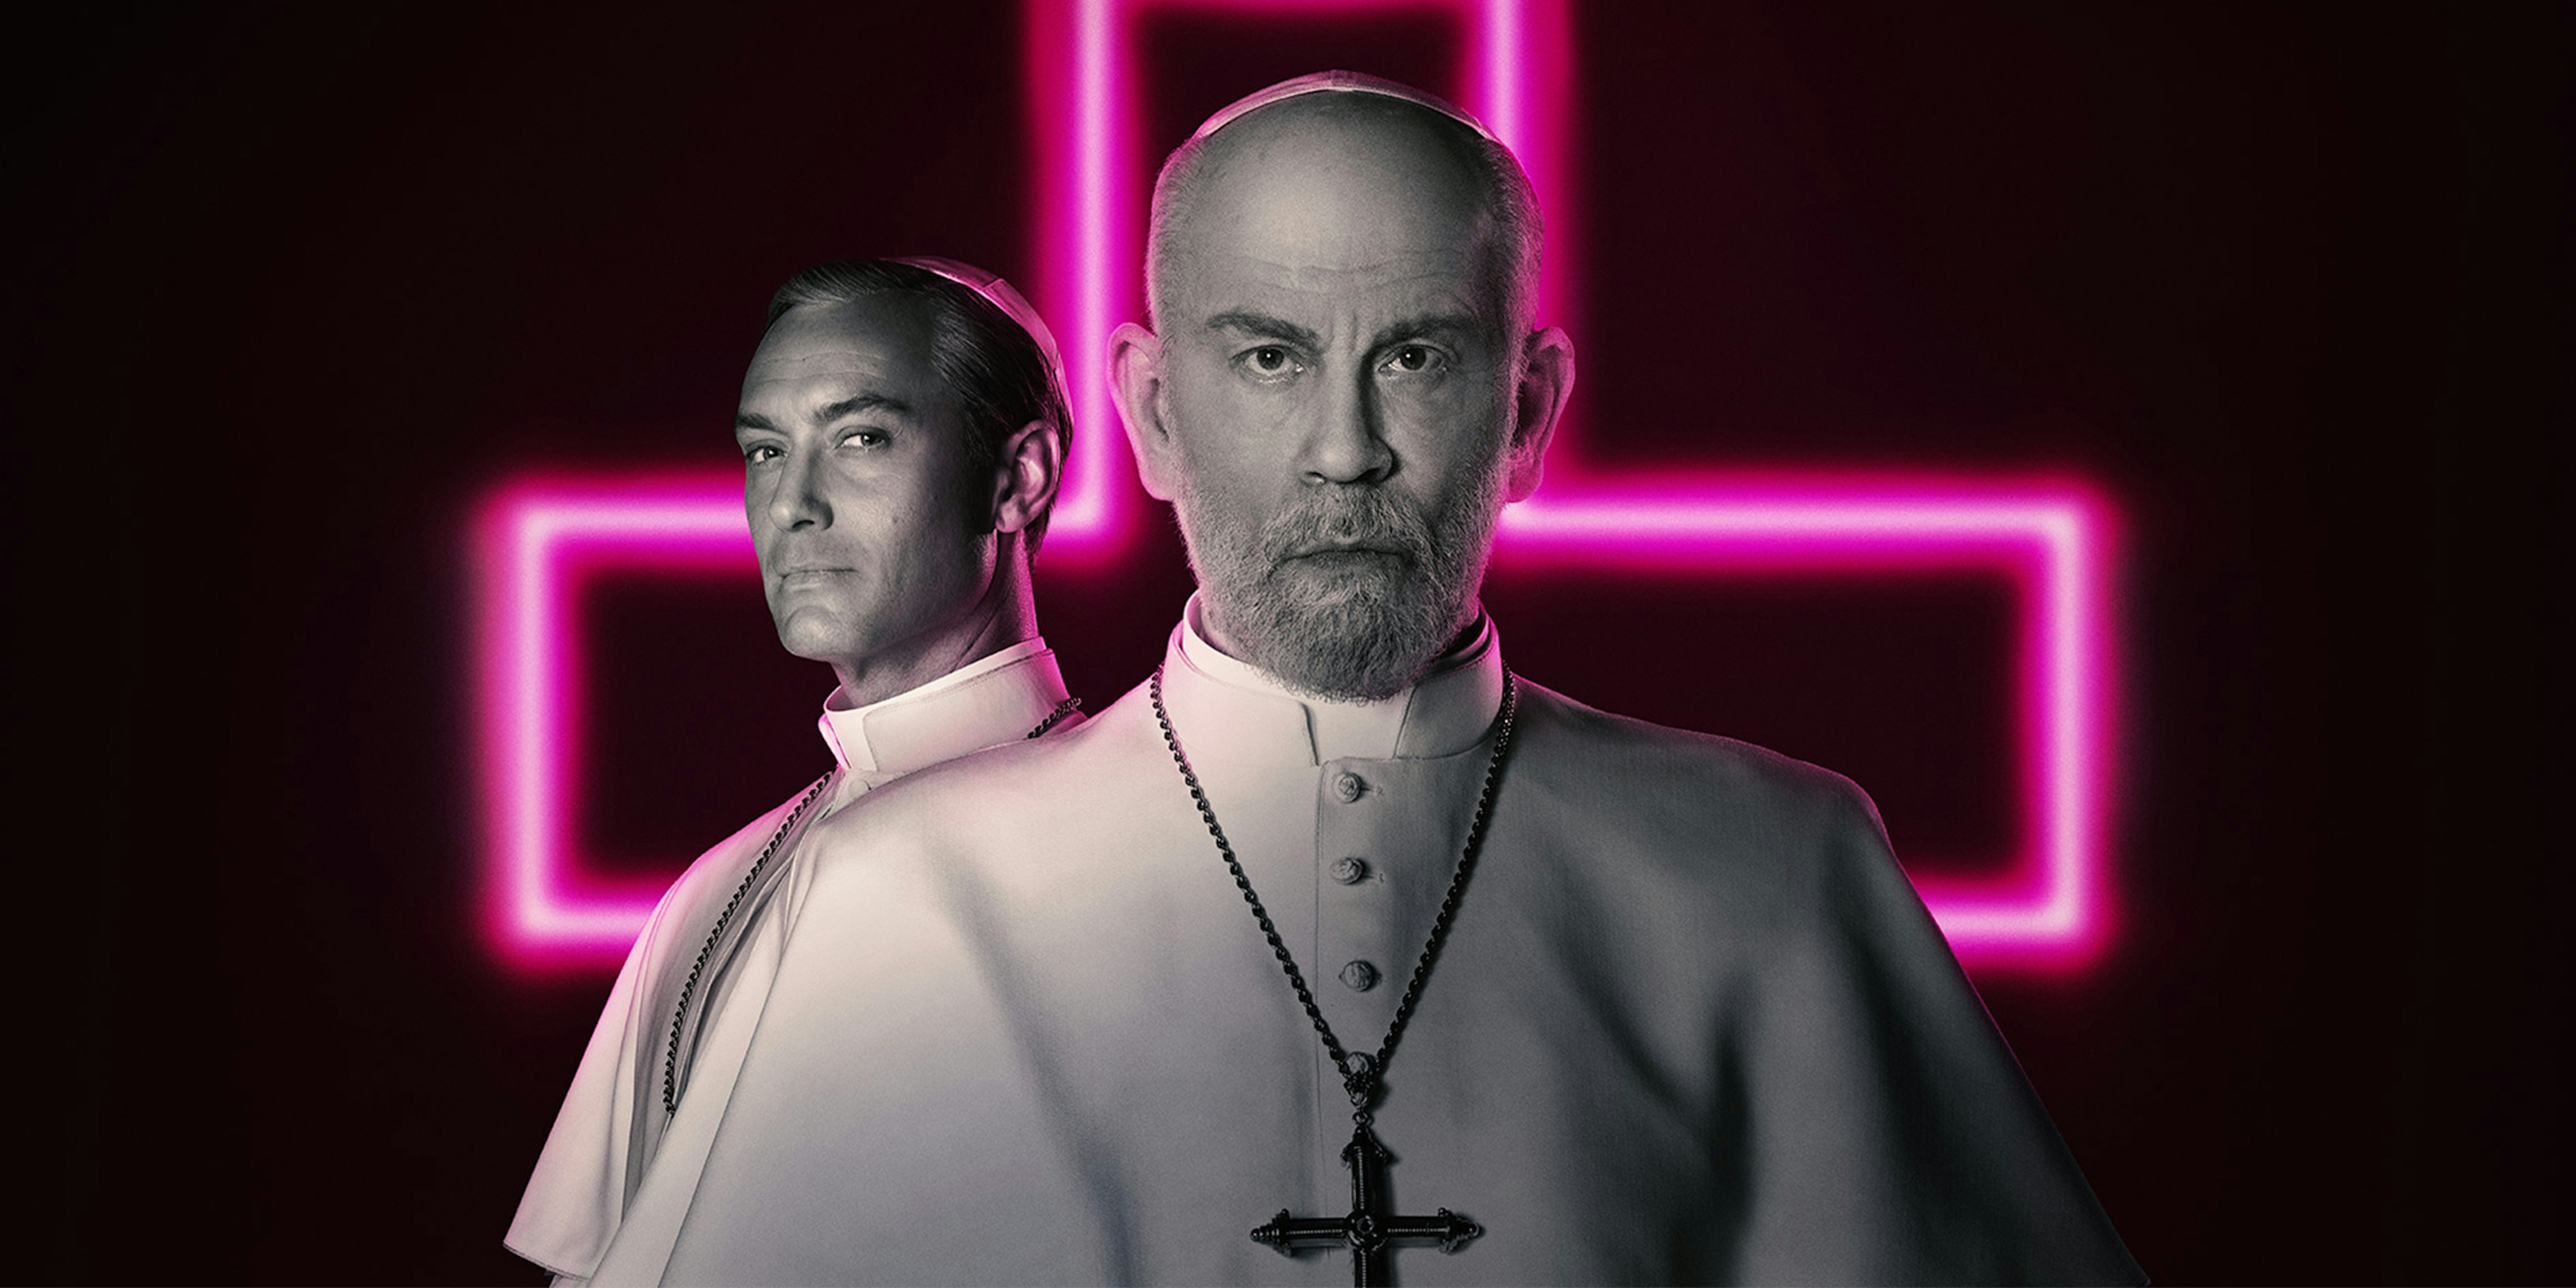 Watch 'The Pope': How to Stream 'The Young Pope' Continuation